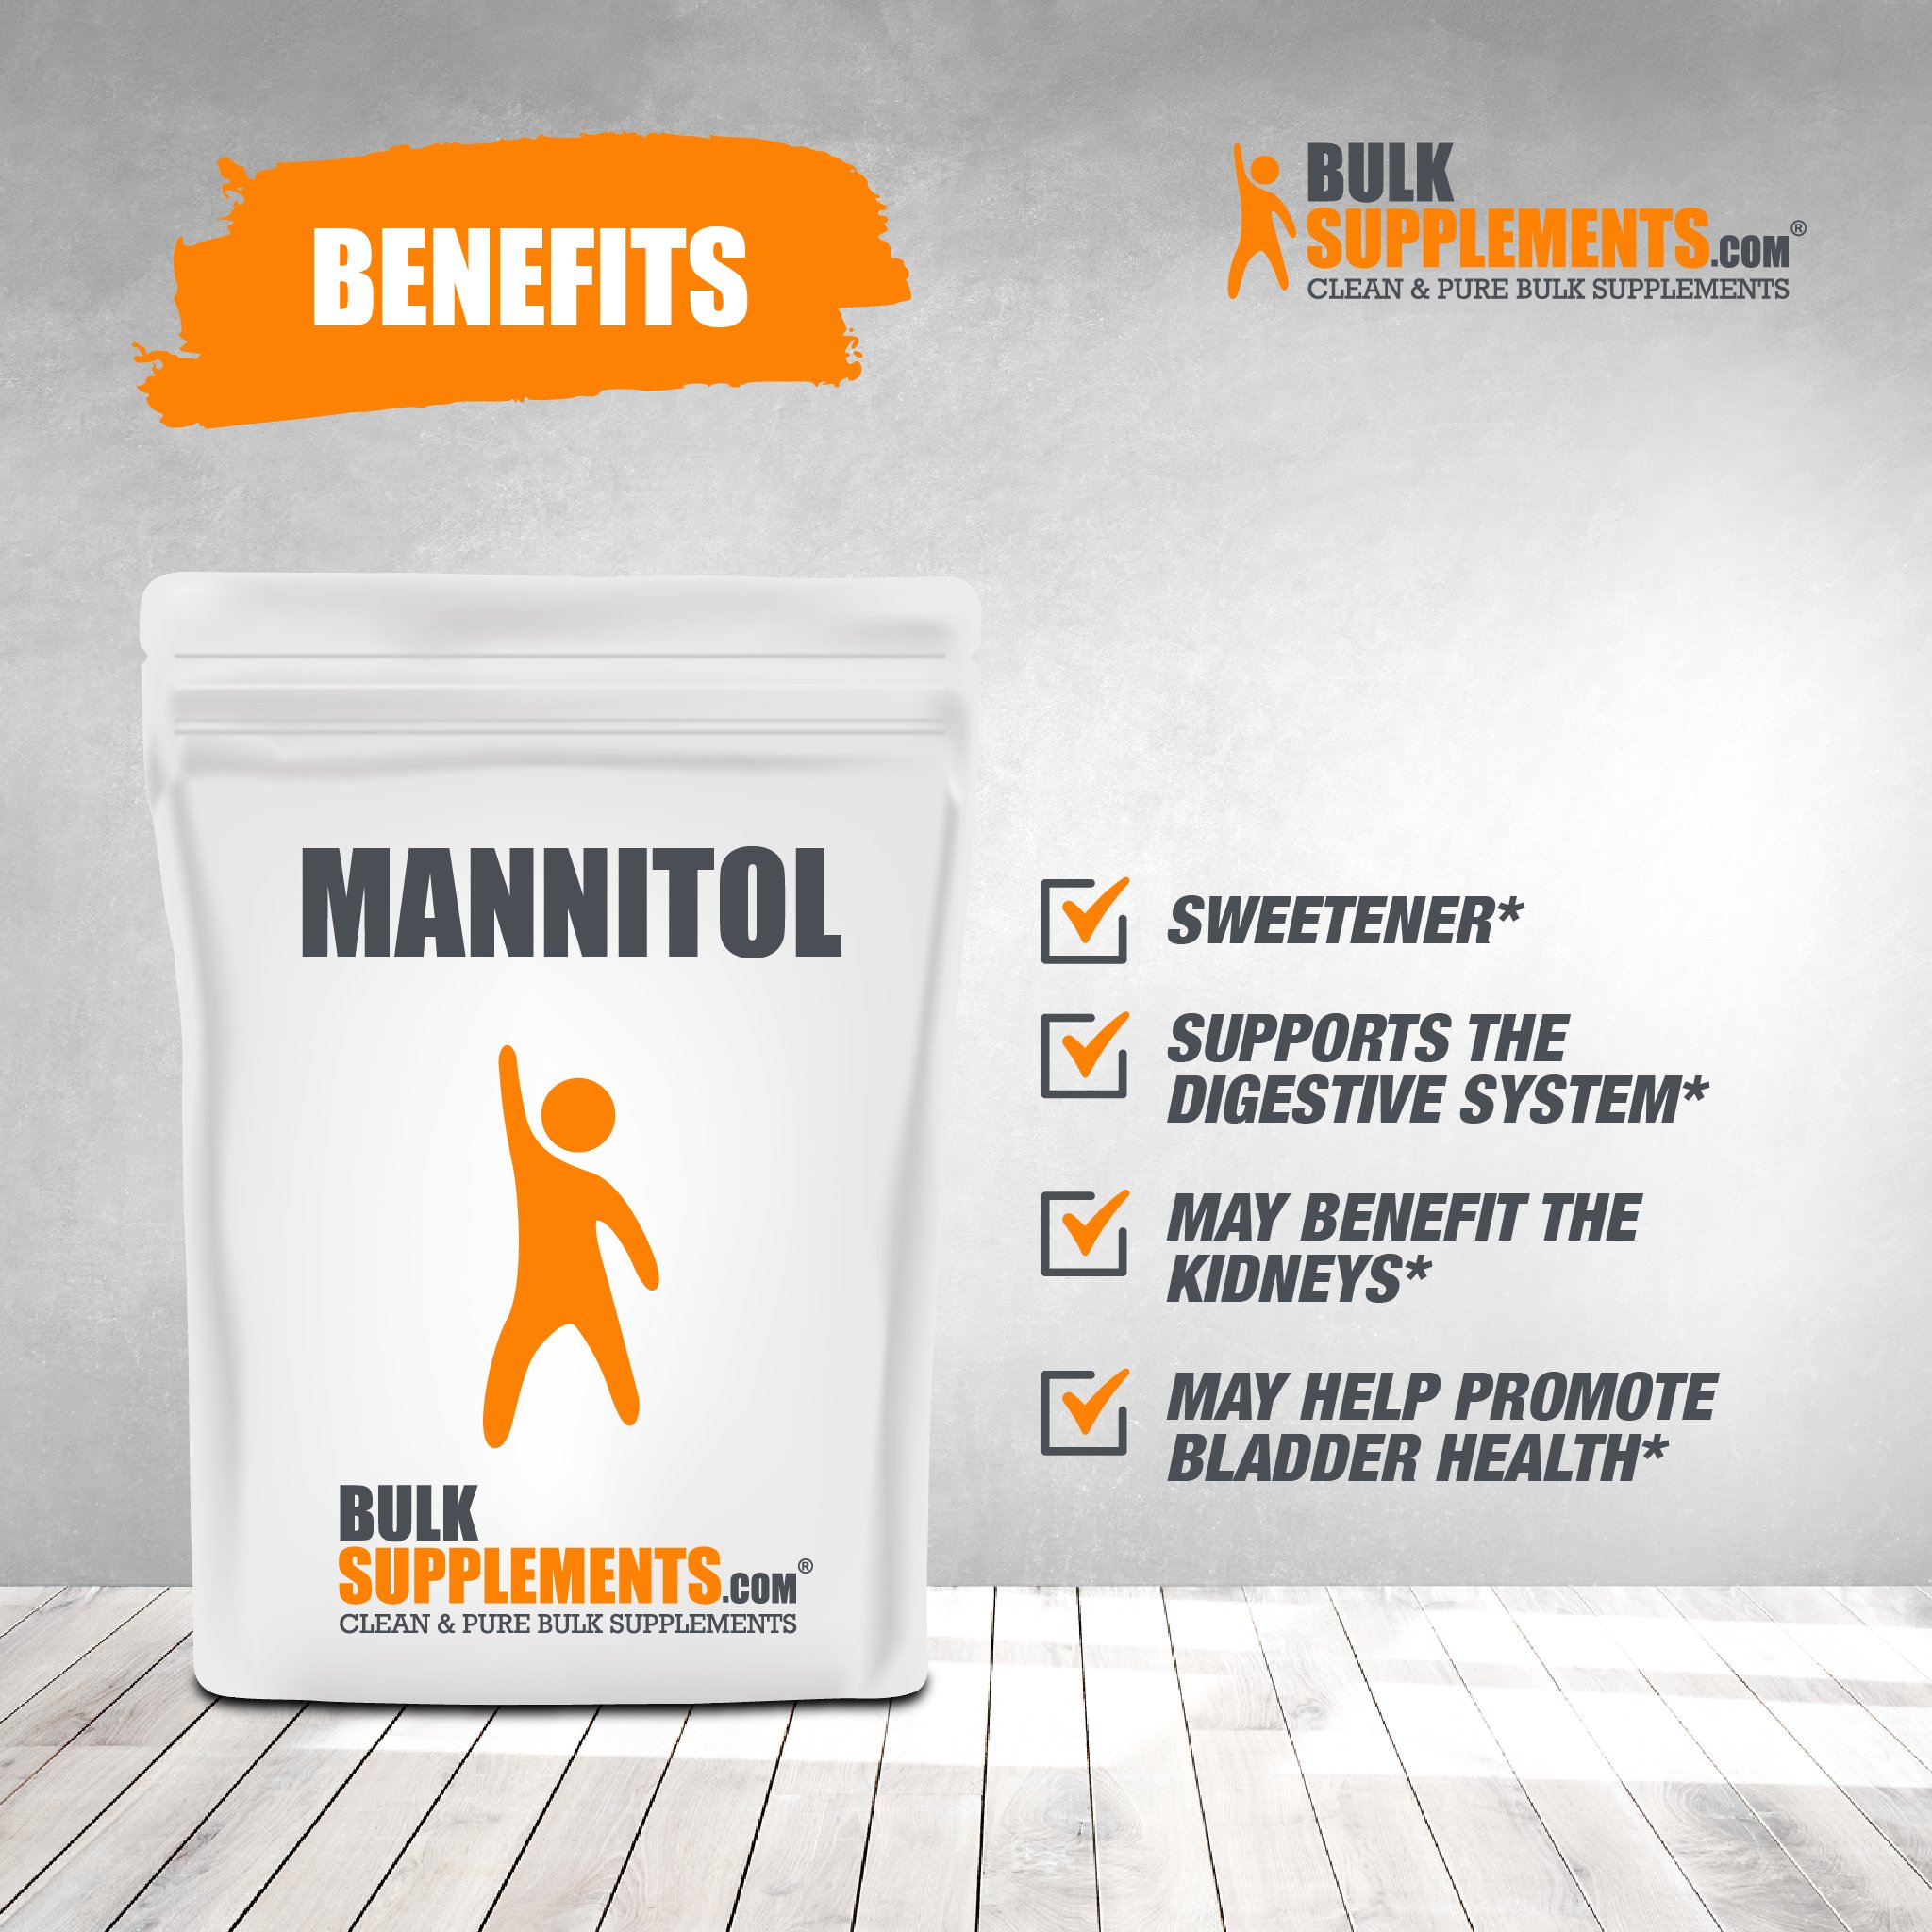 BulkSupplements.com Mannitol Powder - Mannitol Sweetener - Mannitol Powder Ultra Pure - Mannitol Sugar (500 Grams - 1.1 lbs) - image 3 of 5